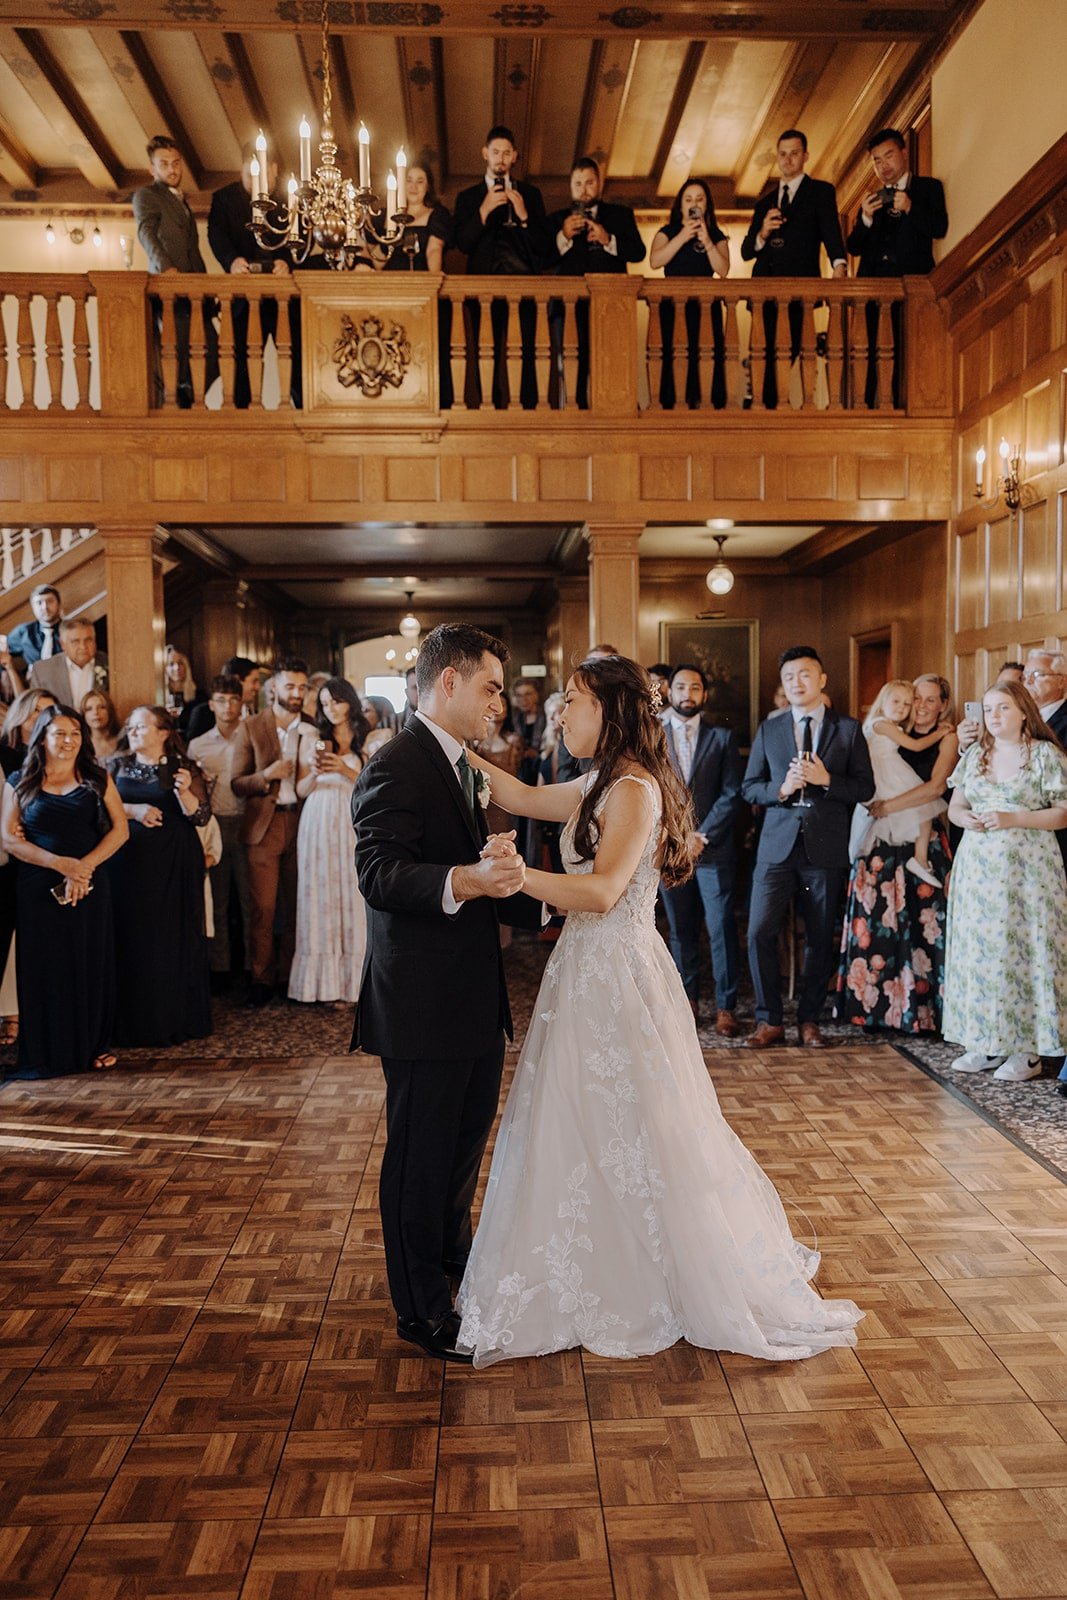 Bride and groom first dance at Lairmont Manor wedding reception